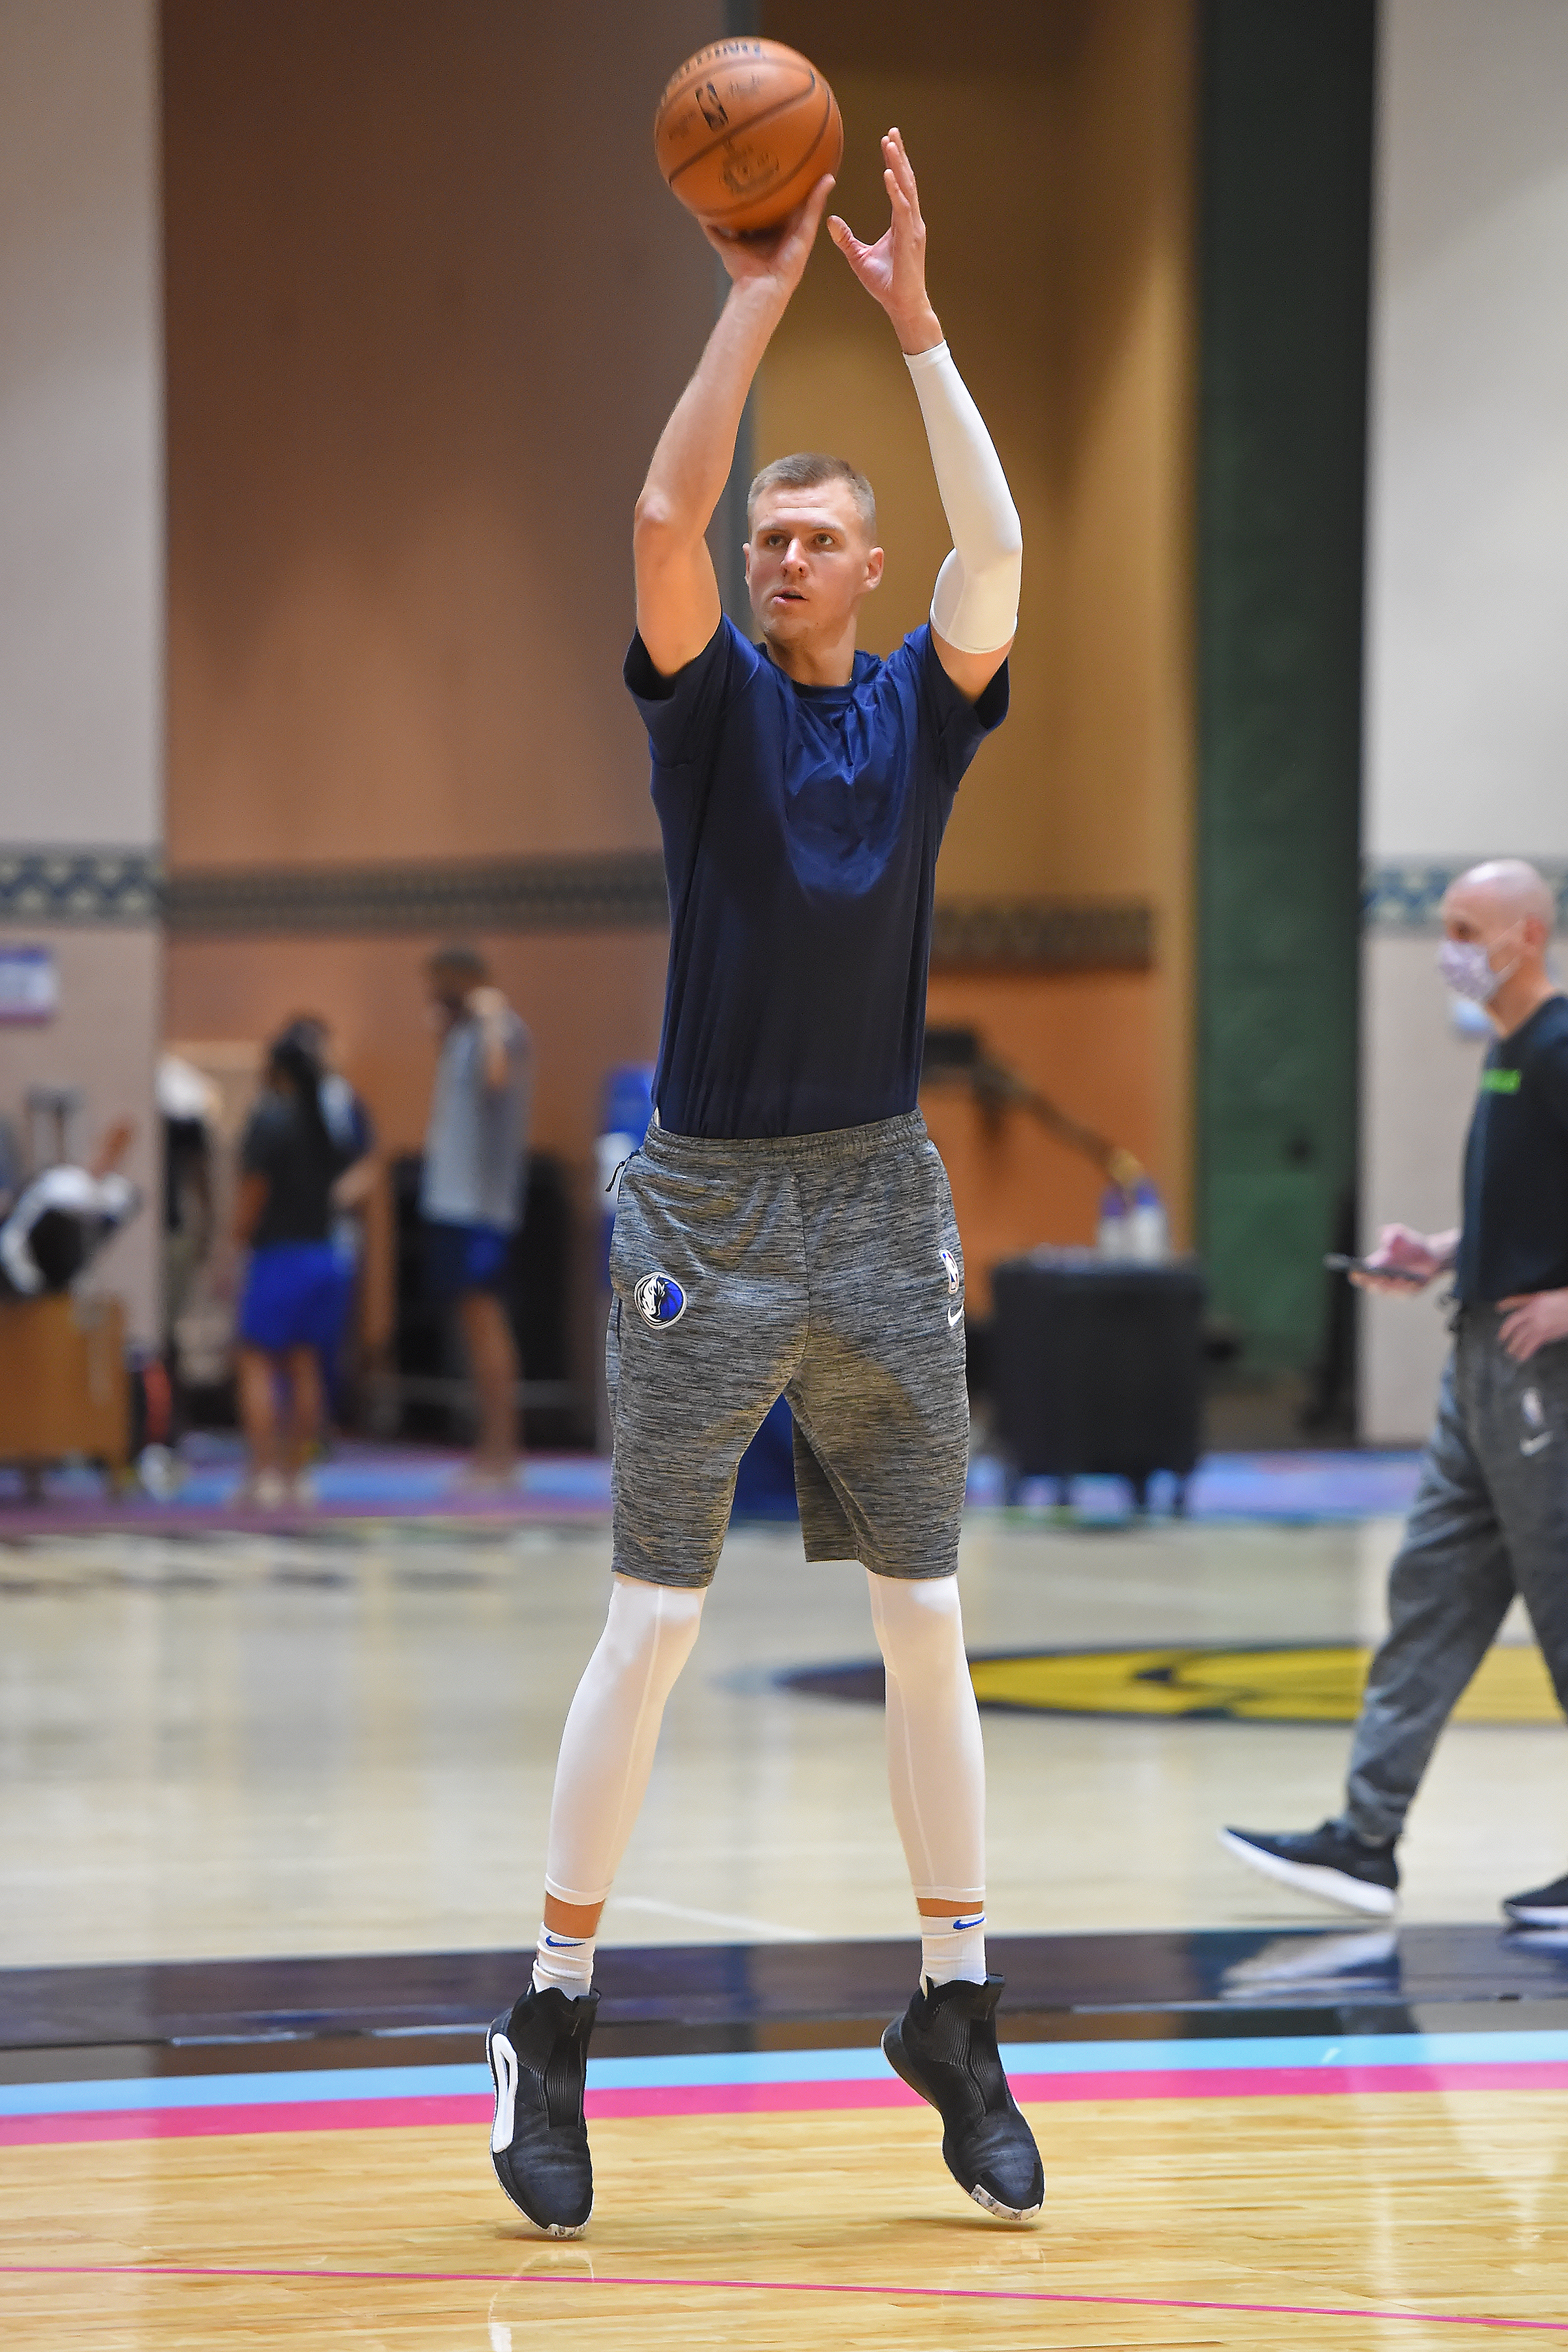 Porzingis remorseful after inadvertently missing coronavirus test - Official Home of the Dallas Mavericks